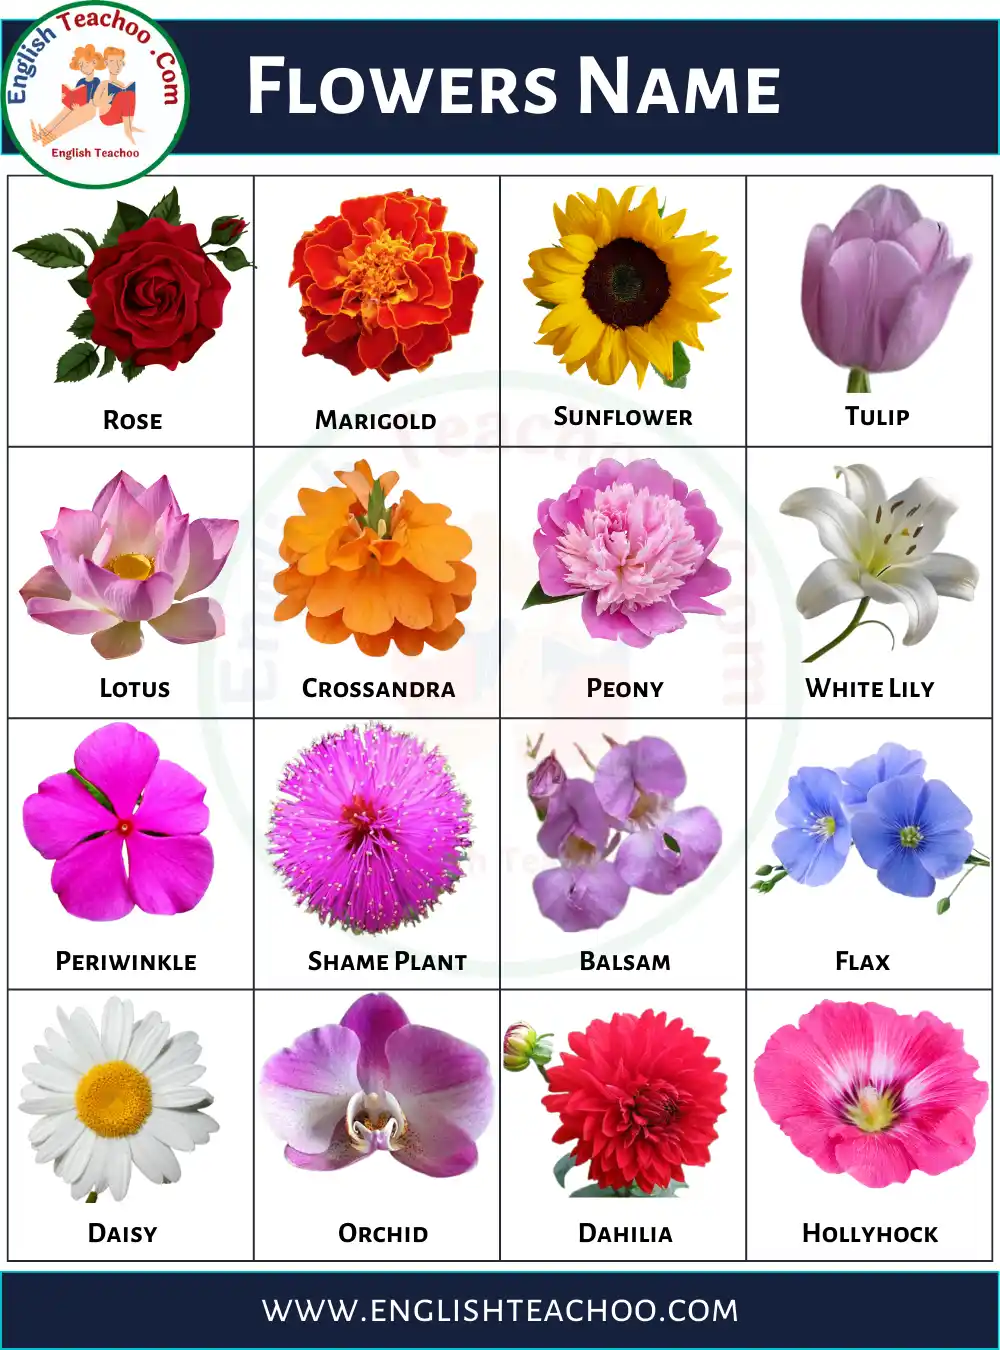 10 Flowers Name In English With Pictures - EnglishTeachoo